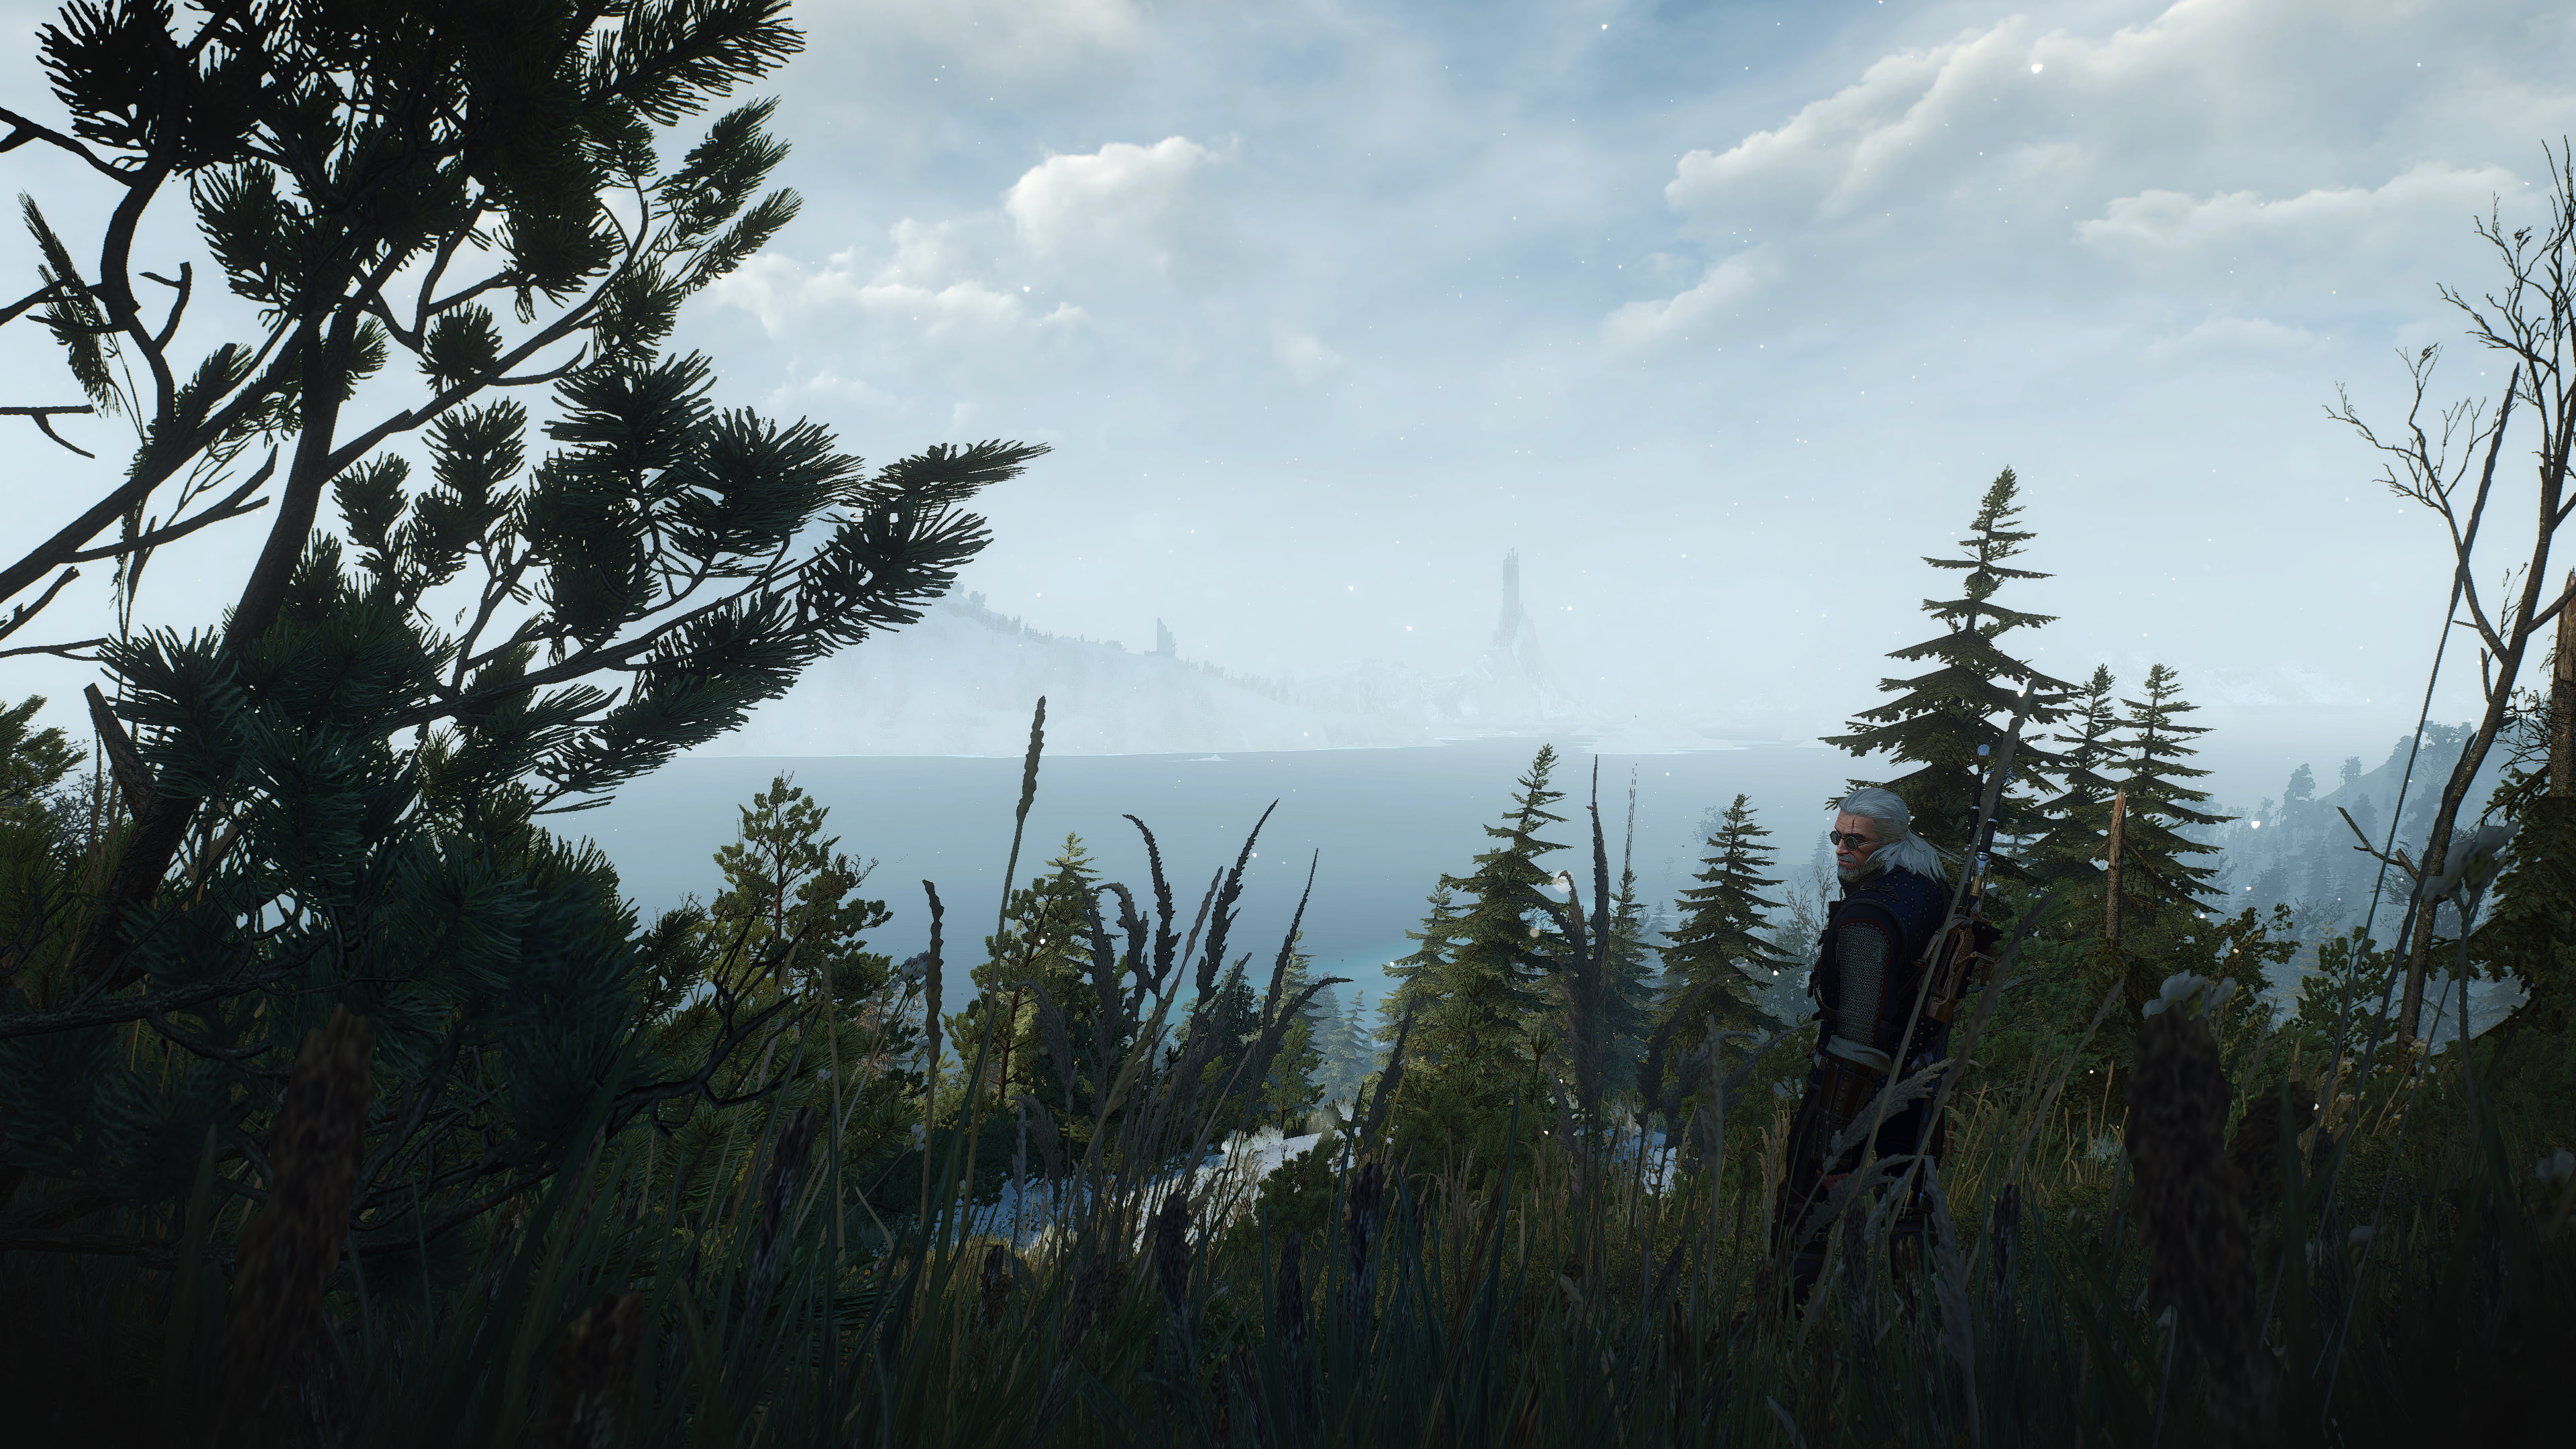 The Witcher, The Witcher 3: Wild Hunt, 4K, Geralt of Rivia